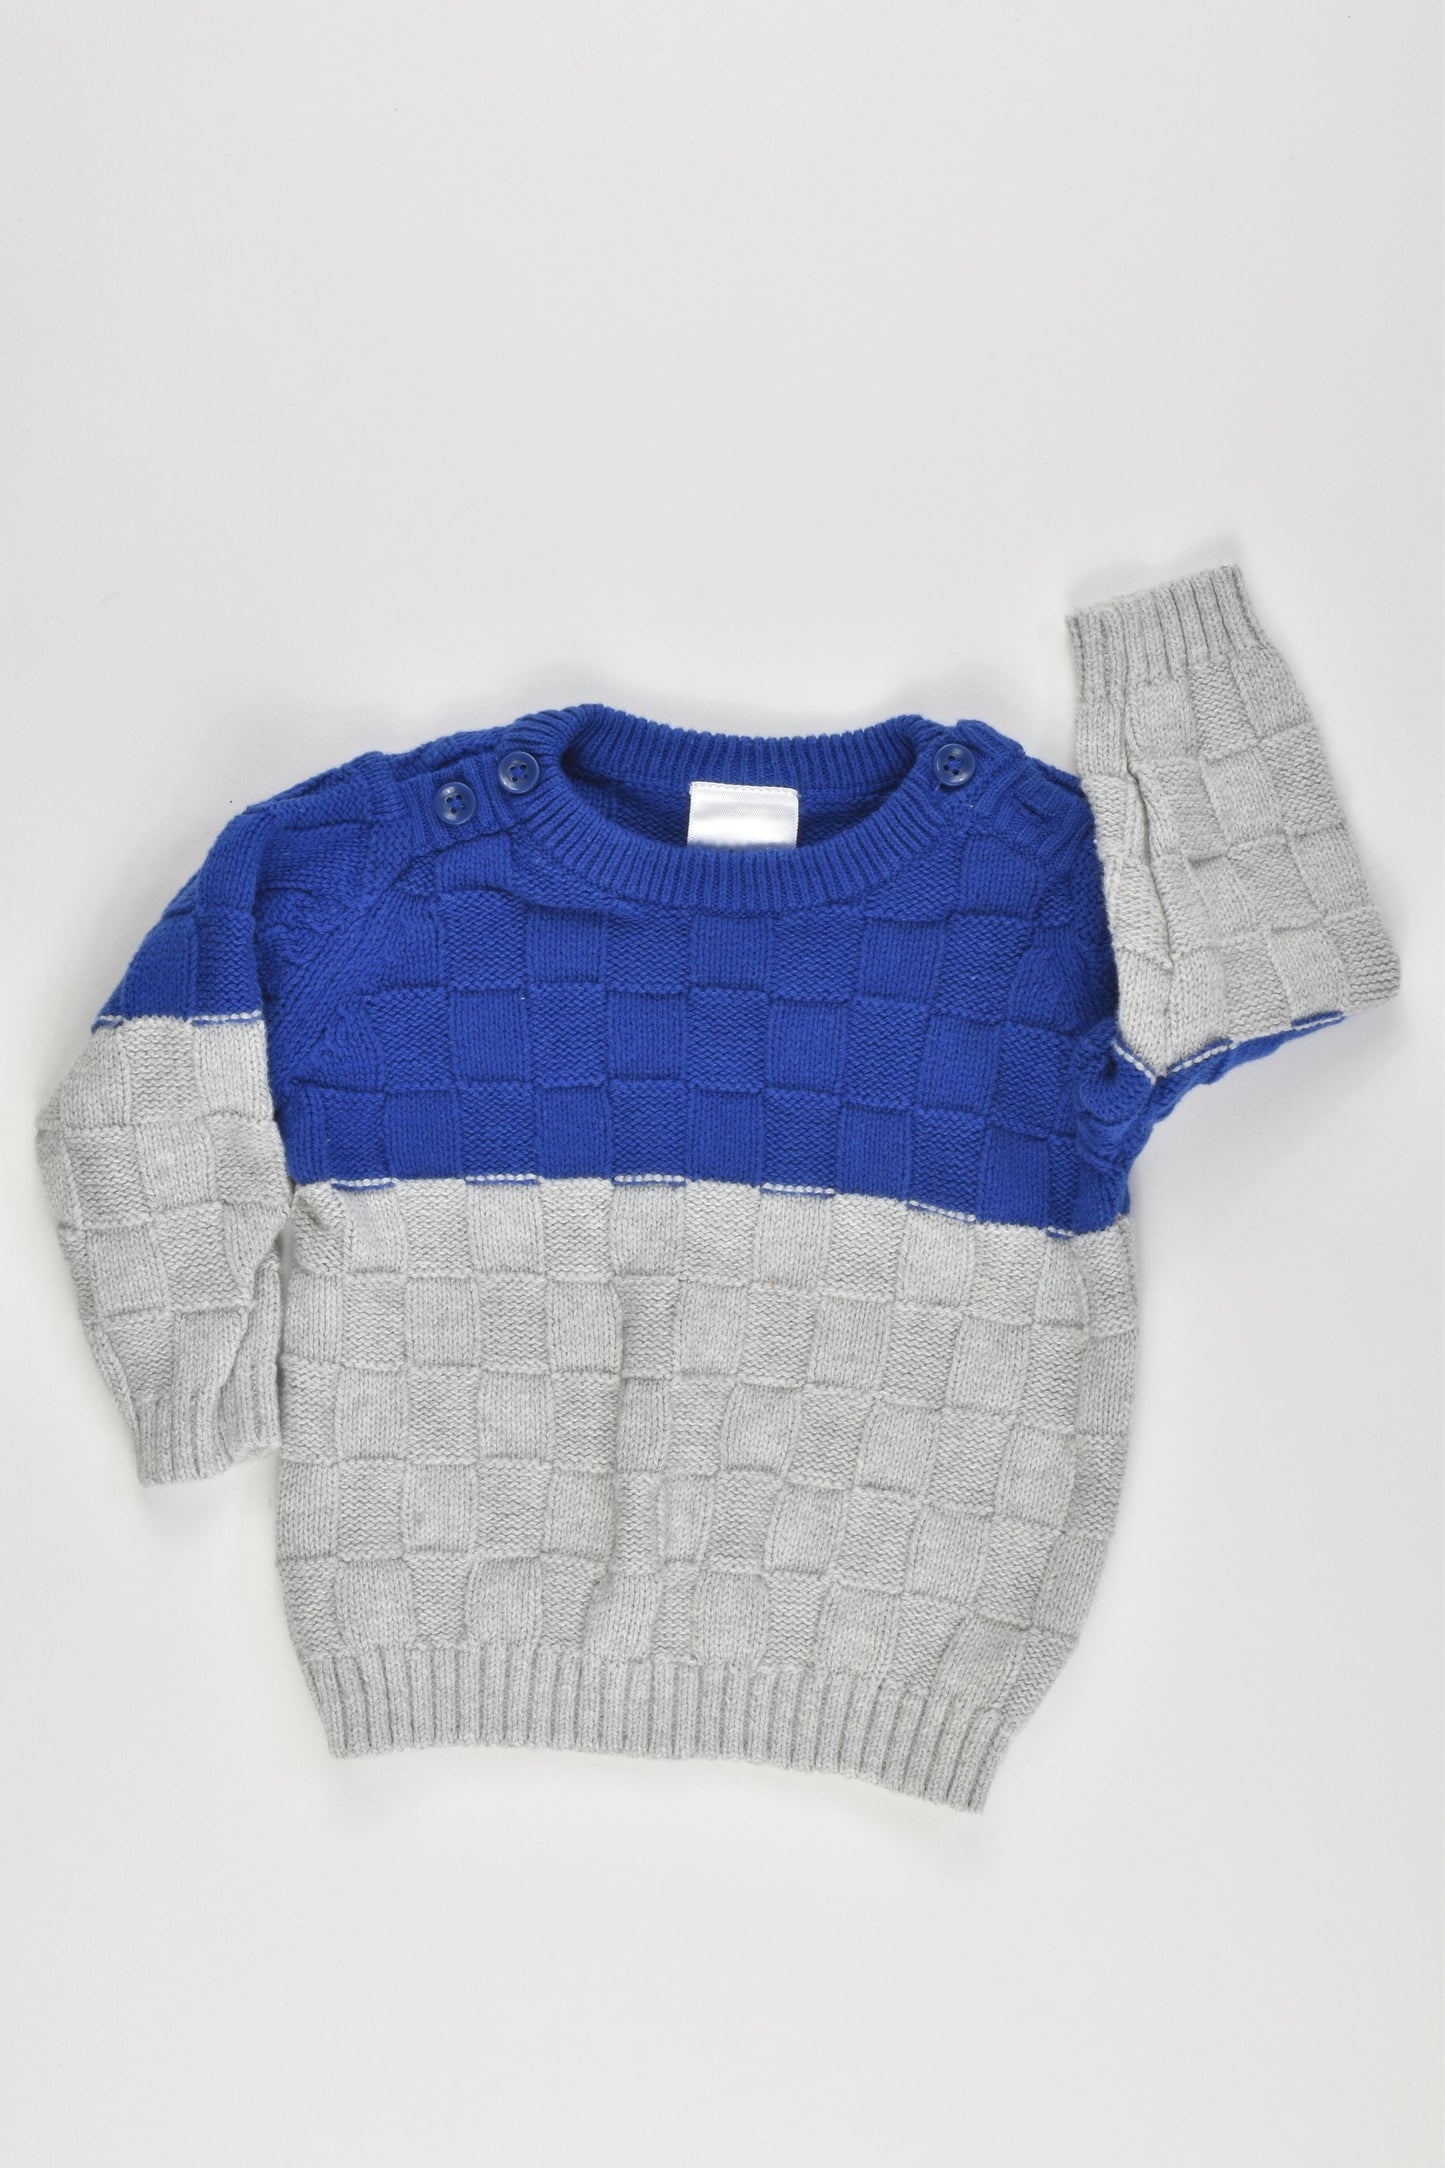 Target Size 000 (0-3 months) Knitted sweater